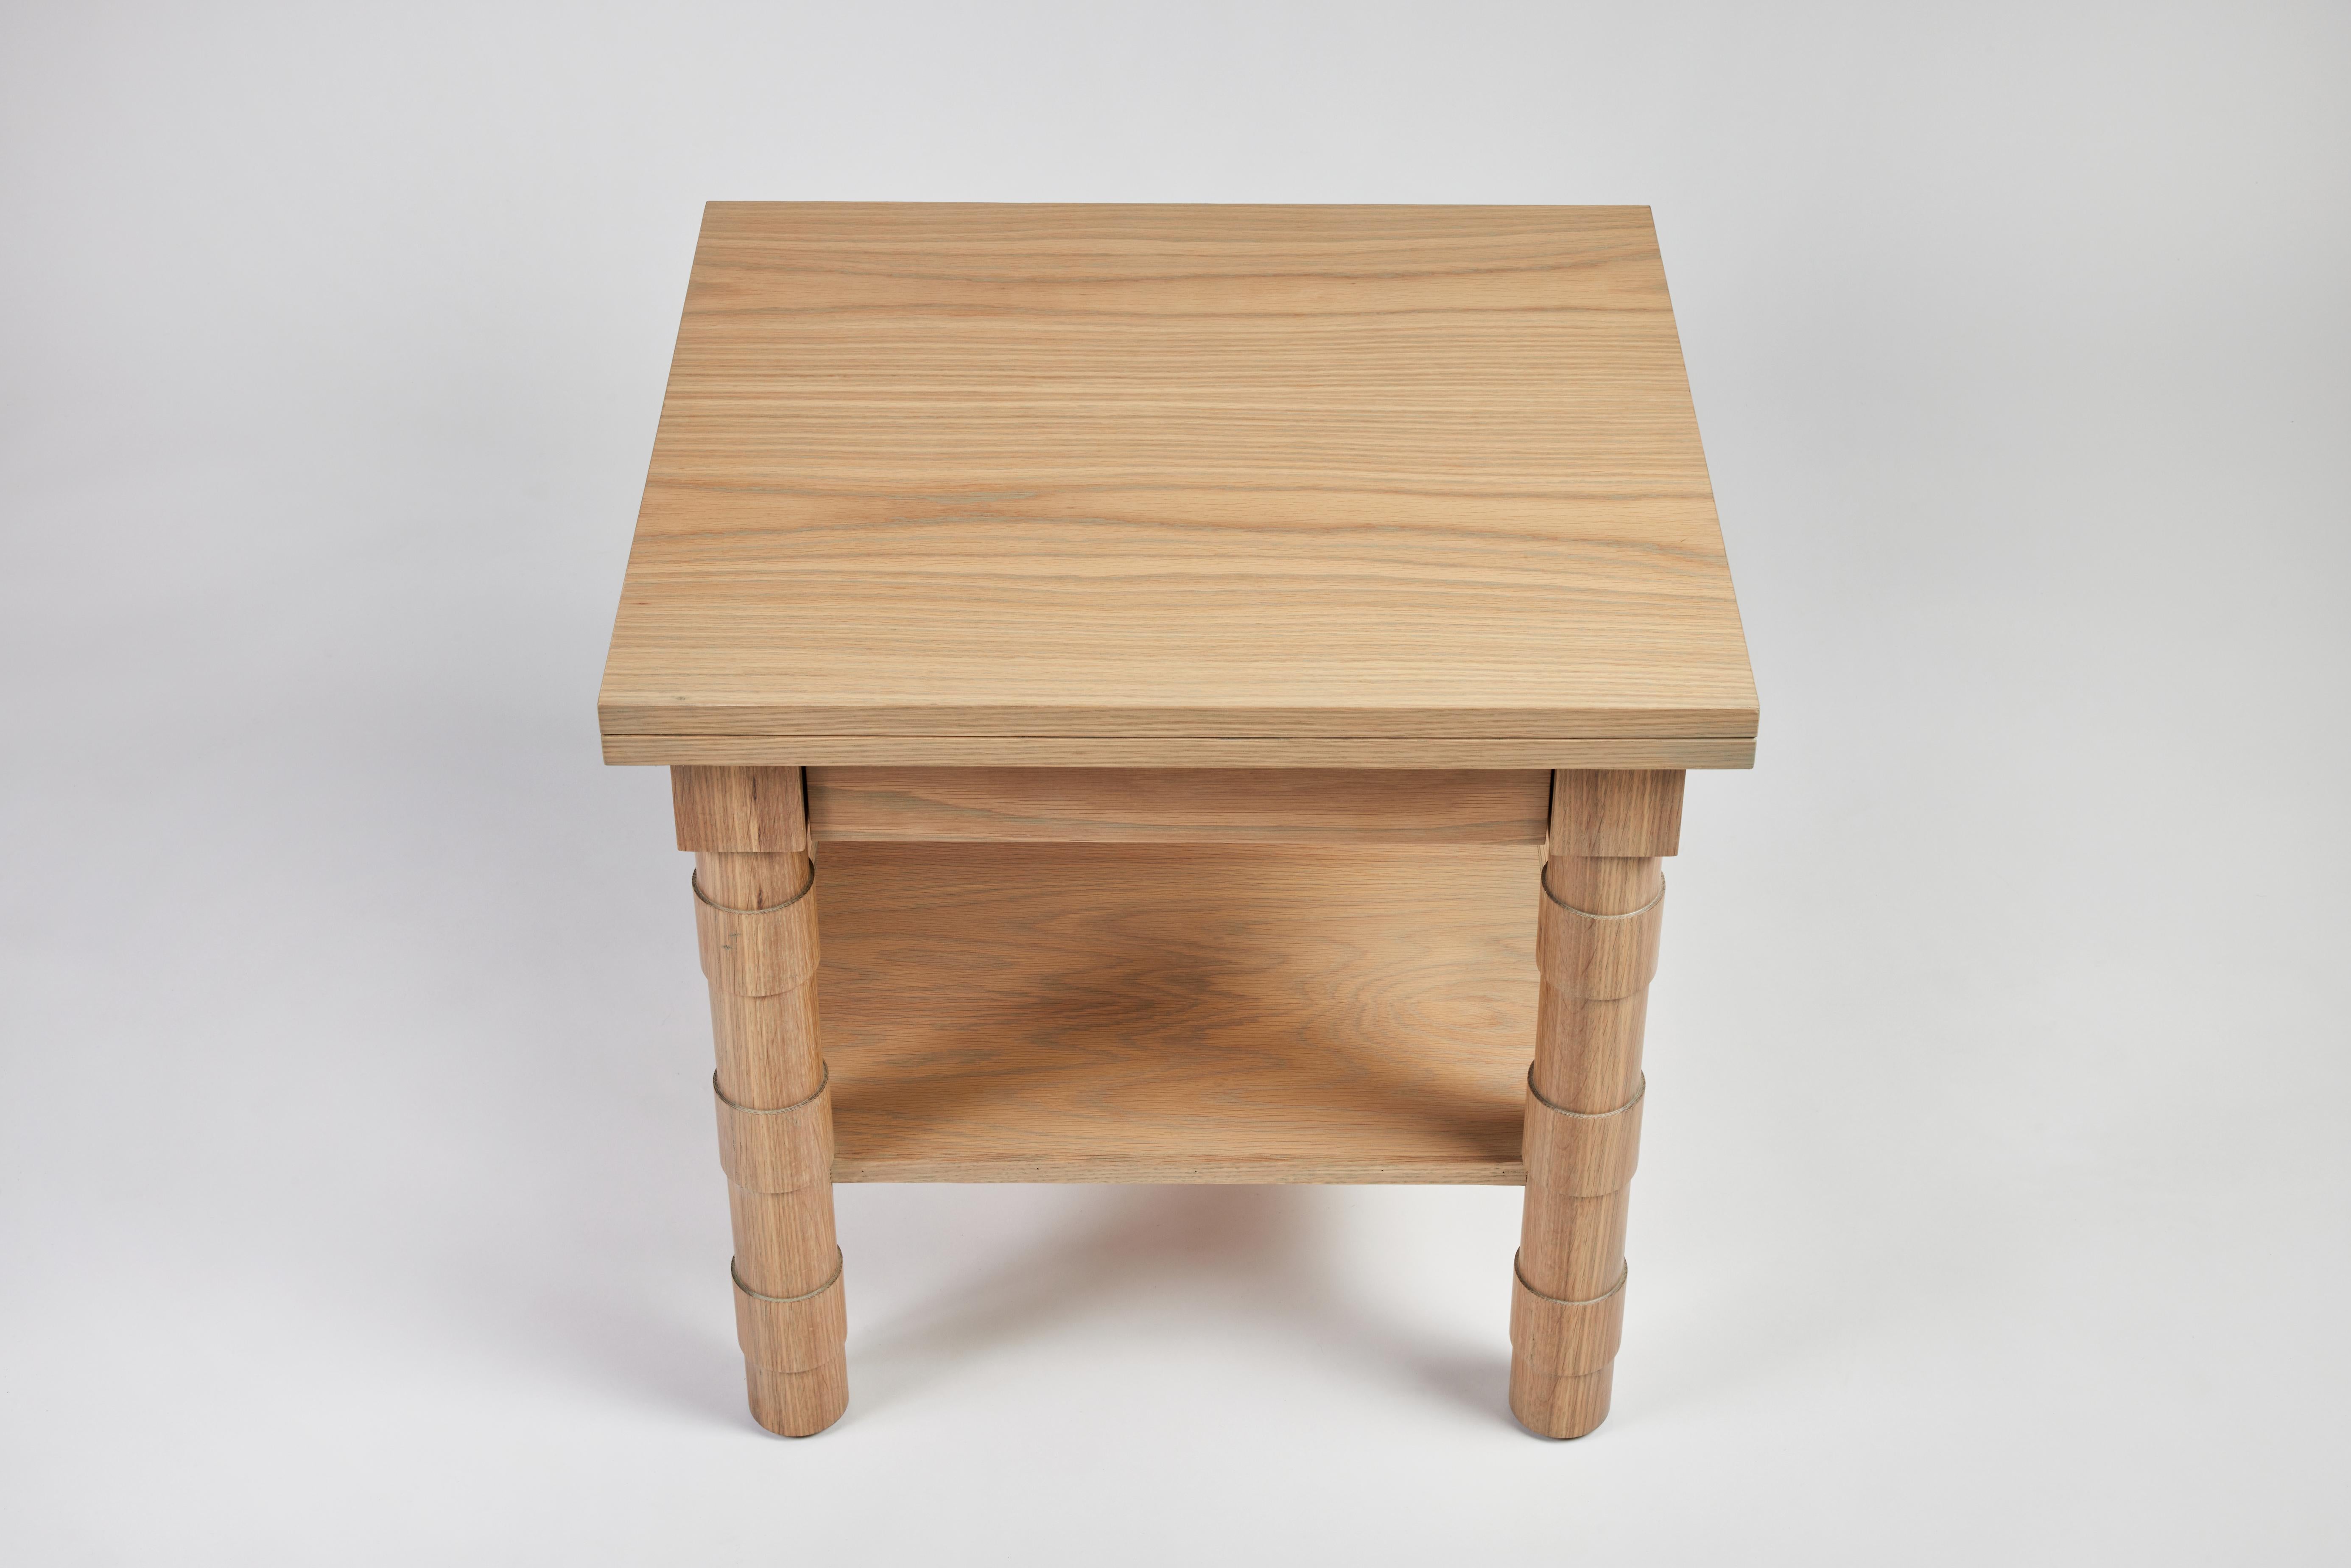 Transitional Turned Leg Jenks Side Table in Oak by Martin and Brockett In New Condition For Sale In Los Angeles, CA